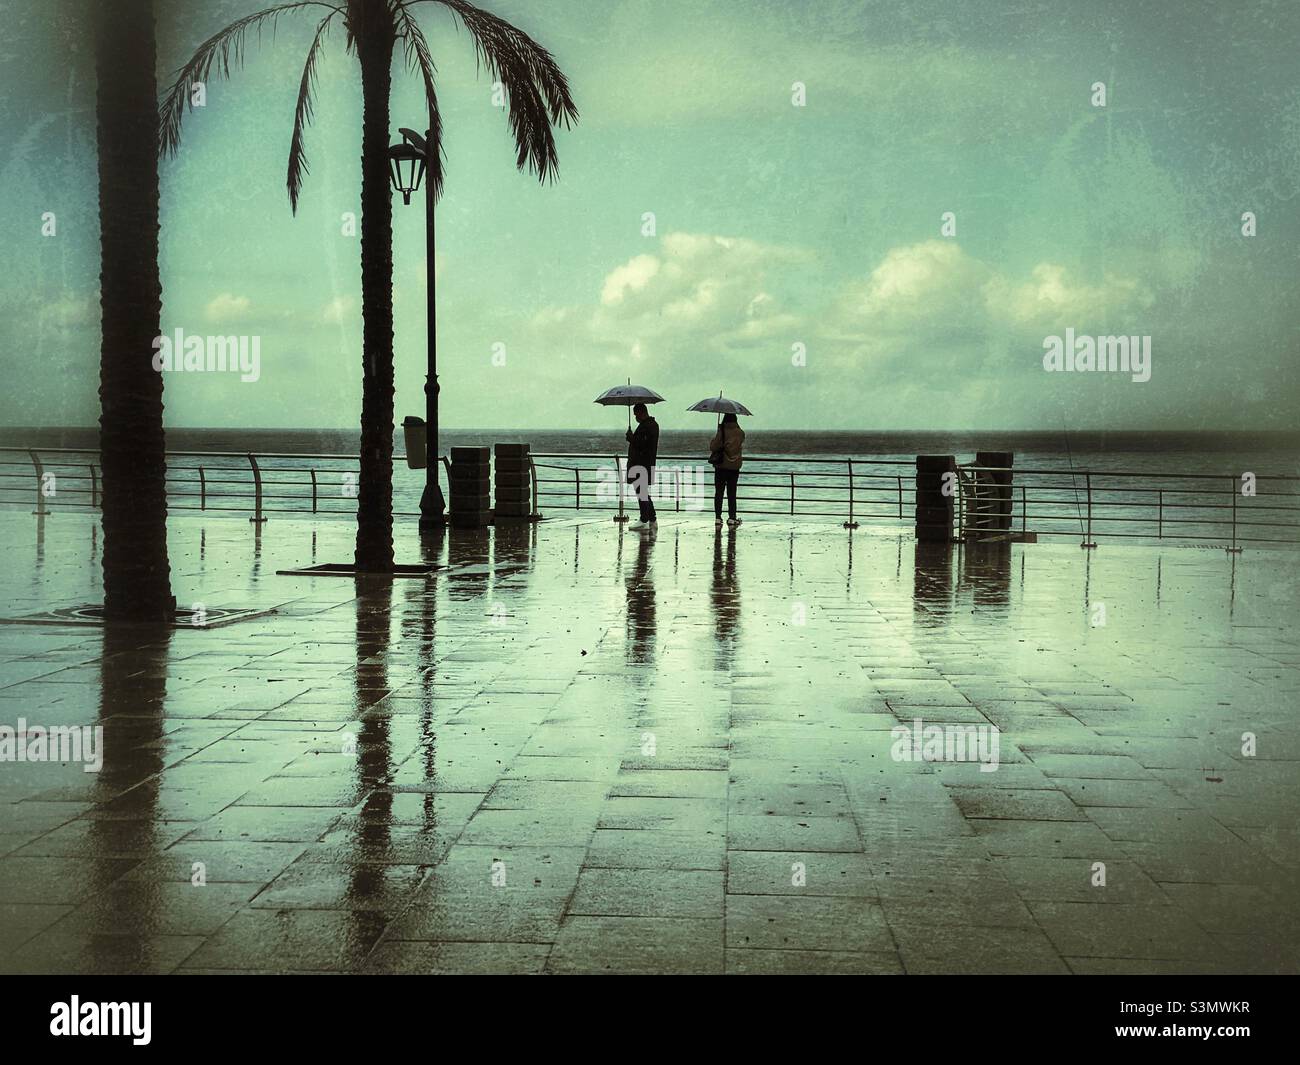 Couples with umbrella standing at the Mediterranean Sea Beirut Lebanon promenade in a rainy day Stock Photo